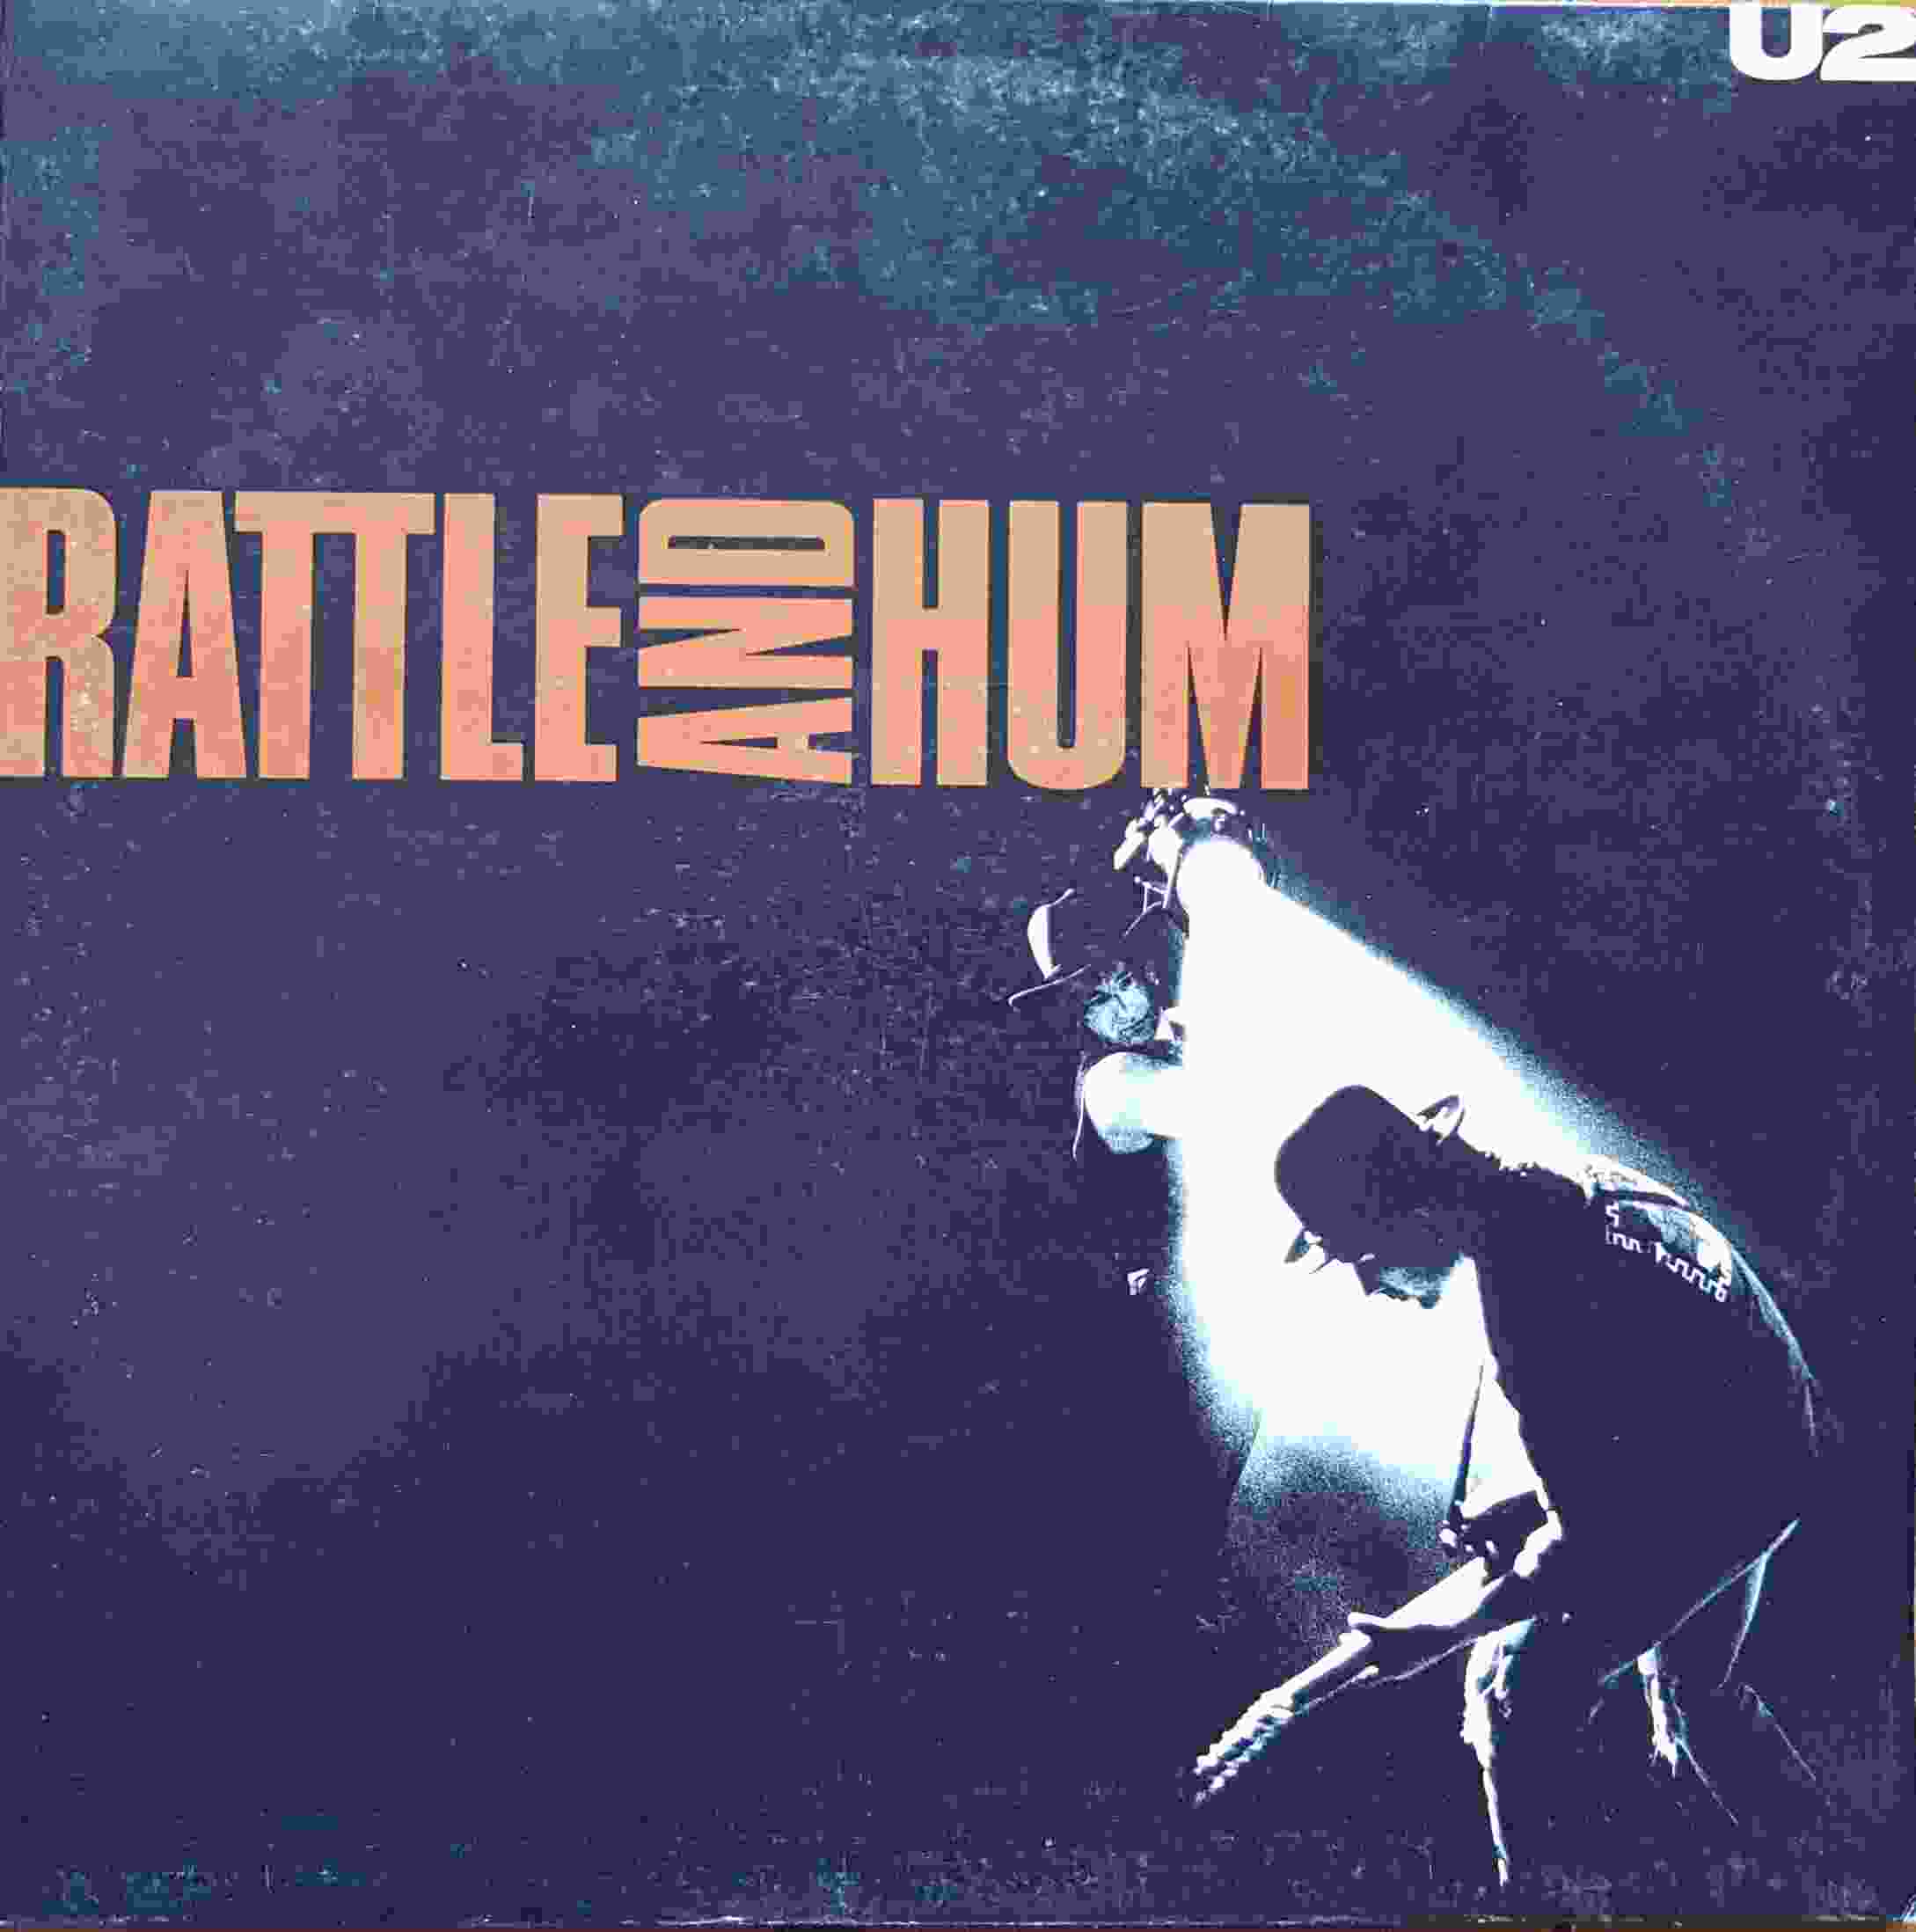 Picture of Battle and hum by artist U2 